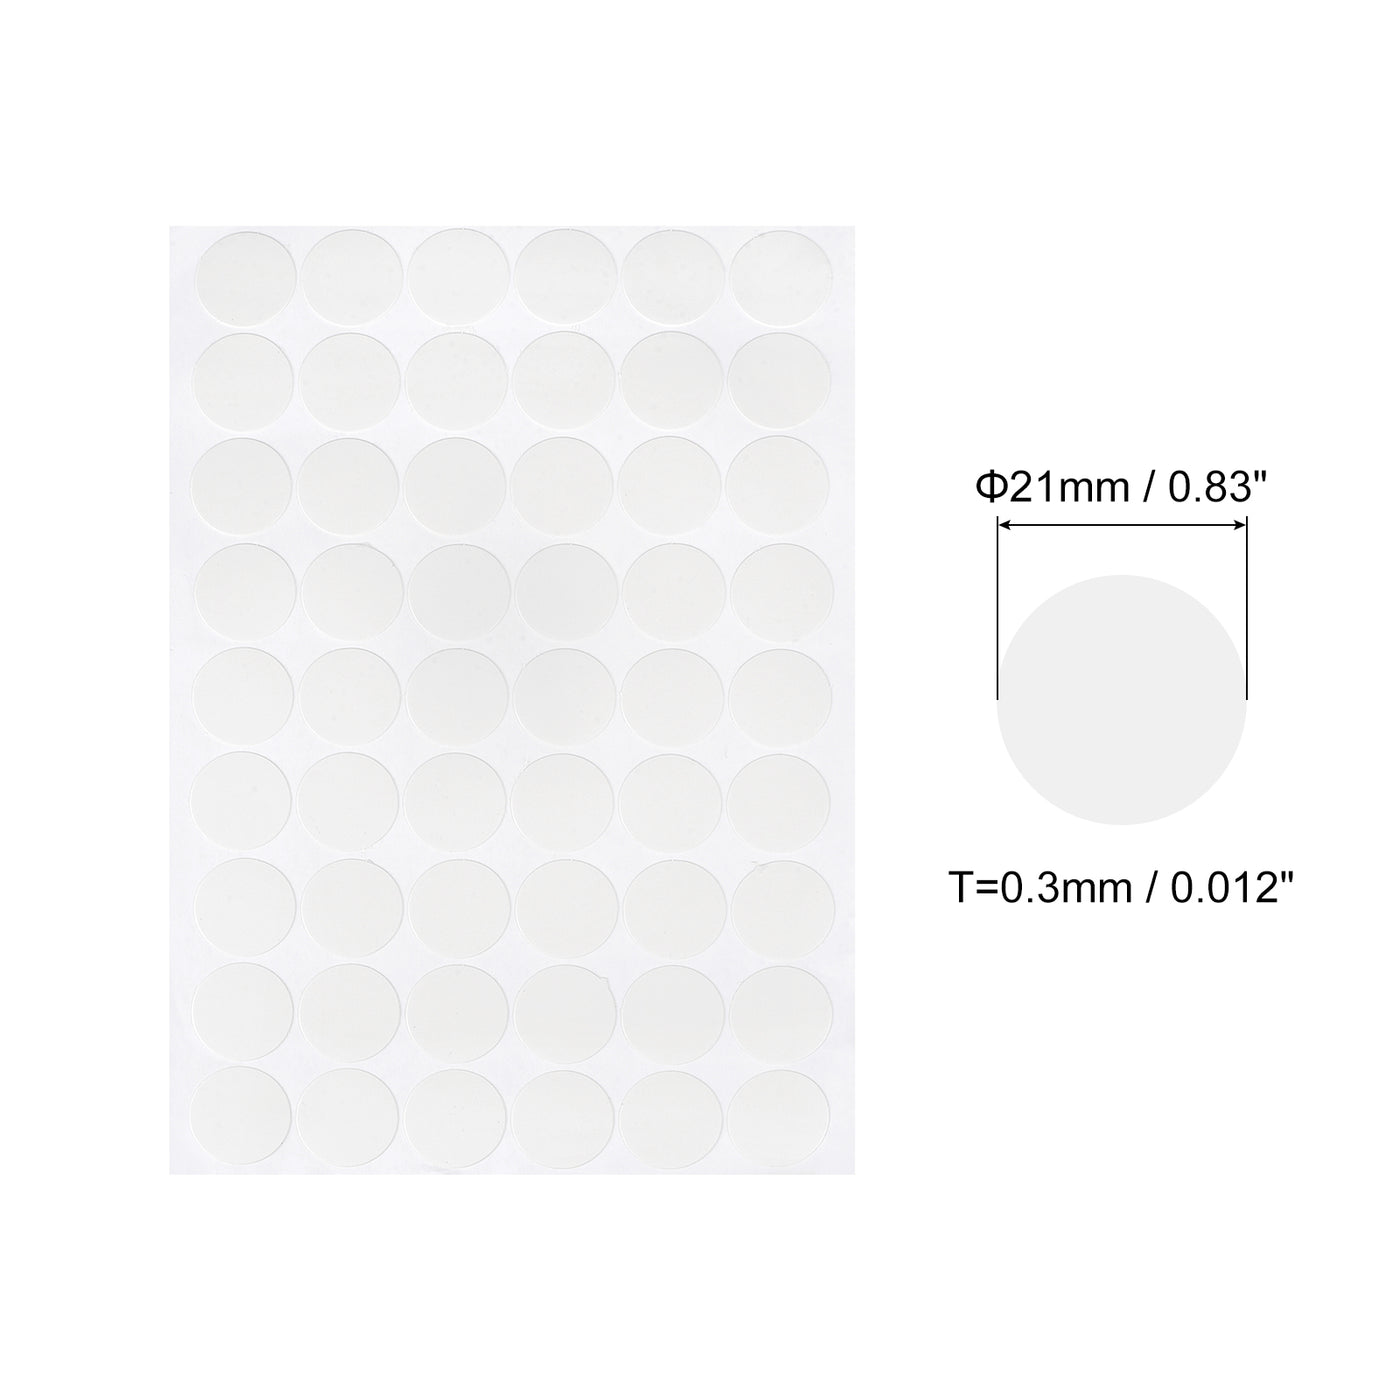 uxcell Uxcell Screw Hole Cover Stickers, 21mm Dia PVC Self Adhesive Covers Caps for Wood Furniture Cabinet Shelf Wardrobe, White 4 Sheet/216pcs